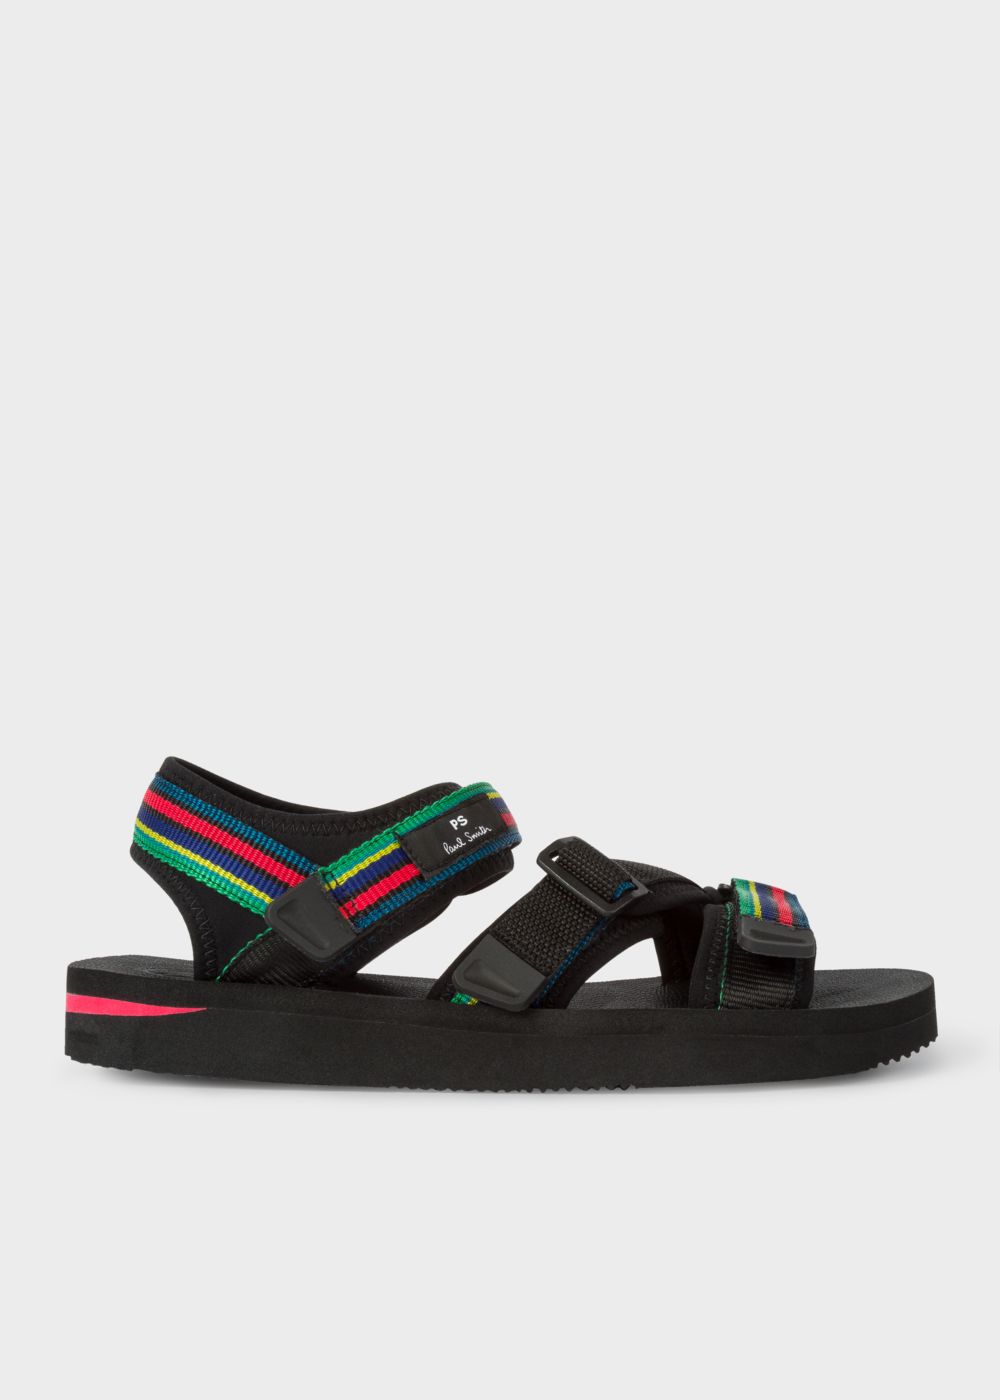 Paul Smith's Webbing Sandals Might be The Only Reason to Wear Sandals ...